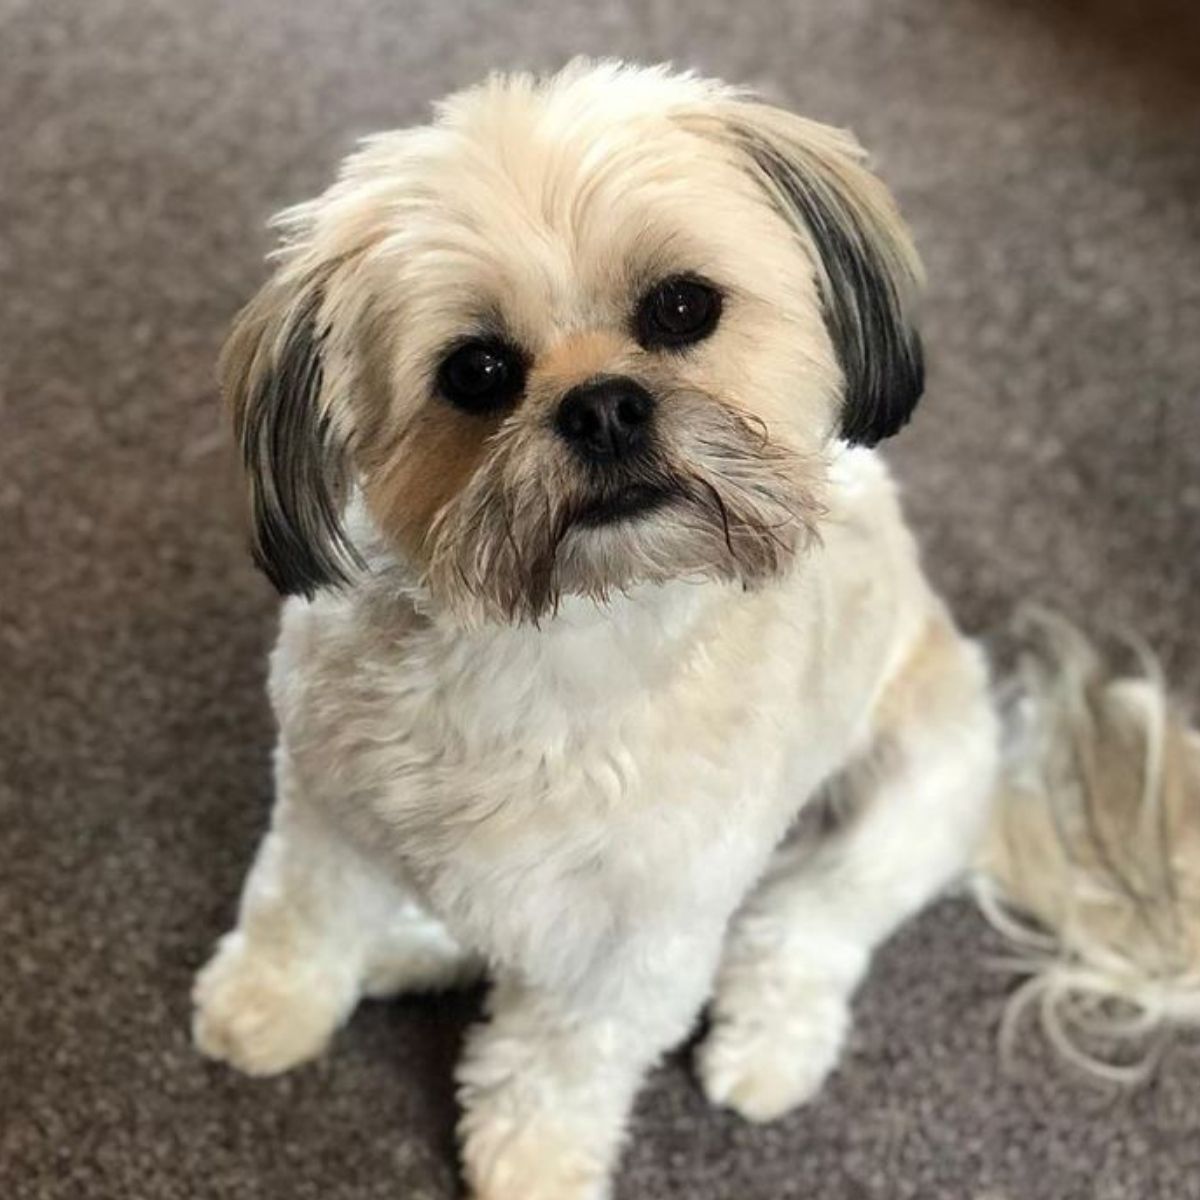 15 Shih Tzus Mixed With Chihuahuas - The Paws